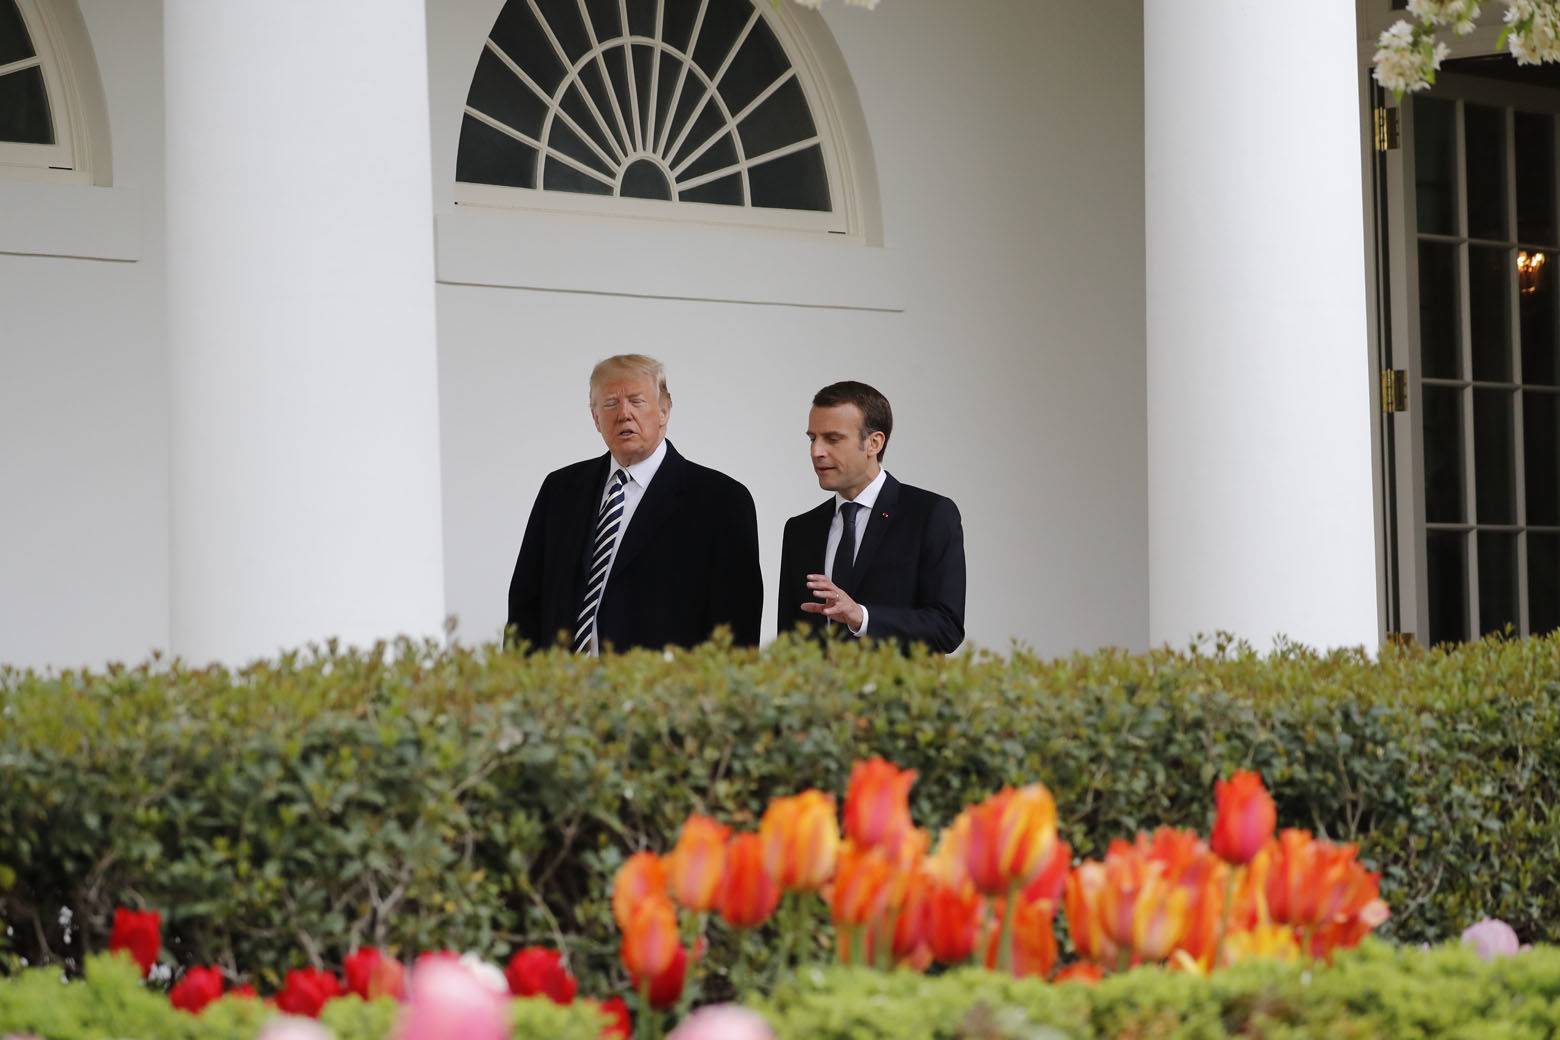 President Donald Trump and French President Emmanuel Macron walk to the Oval Office of the White House in Washington, Tuesday, April 24, 2018. Trump said the partnership he forged with Macron at the start of his presidency was a testament to the "enduring friendship that binds our two nations."  (AP Photo/Pablo Martinez Monsivais)